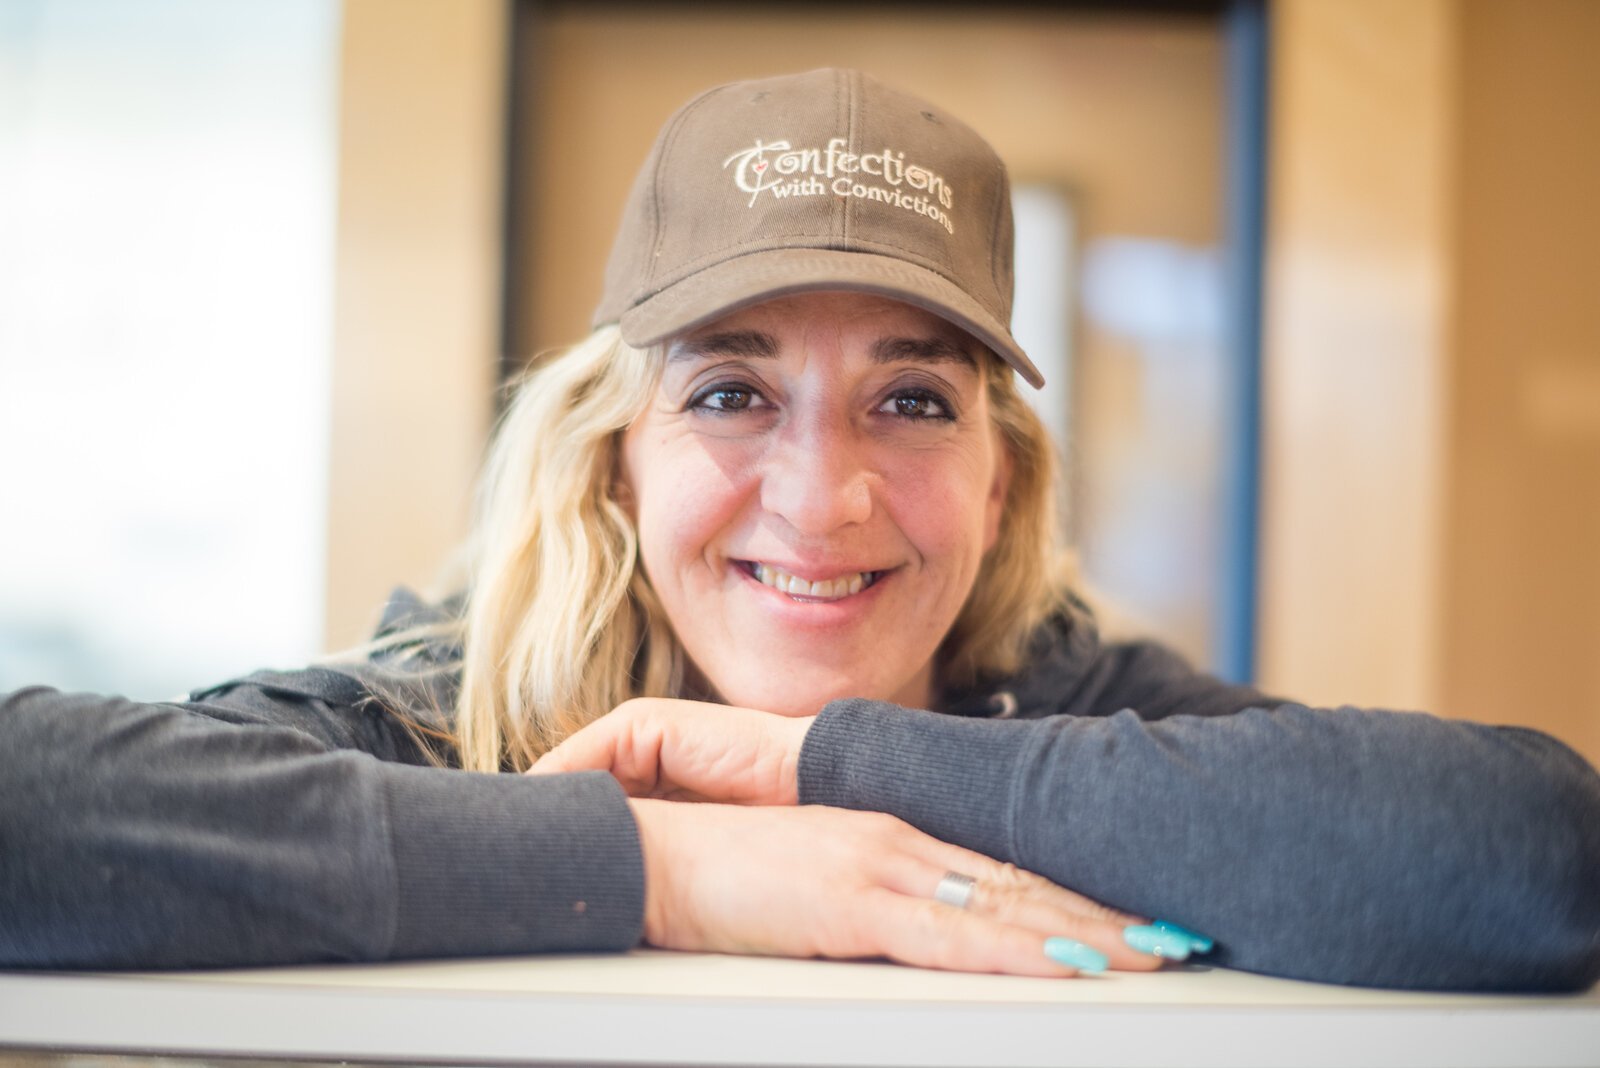 New Confections with Convictions owner Jennifer Faketty